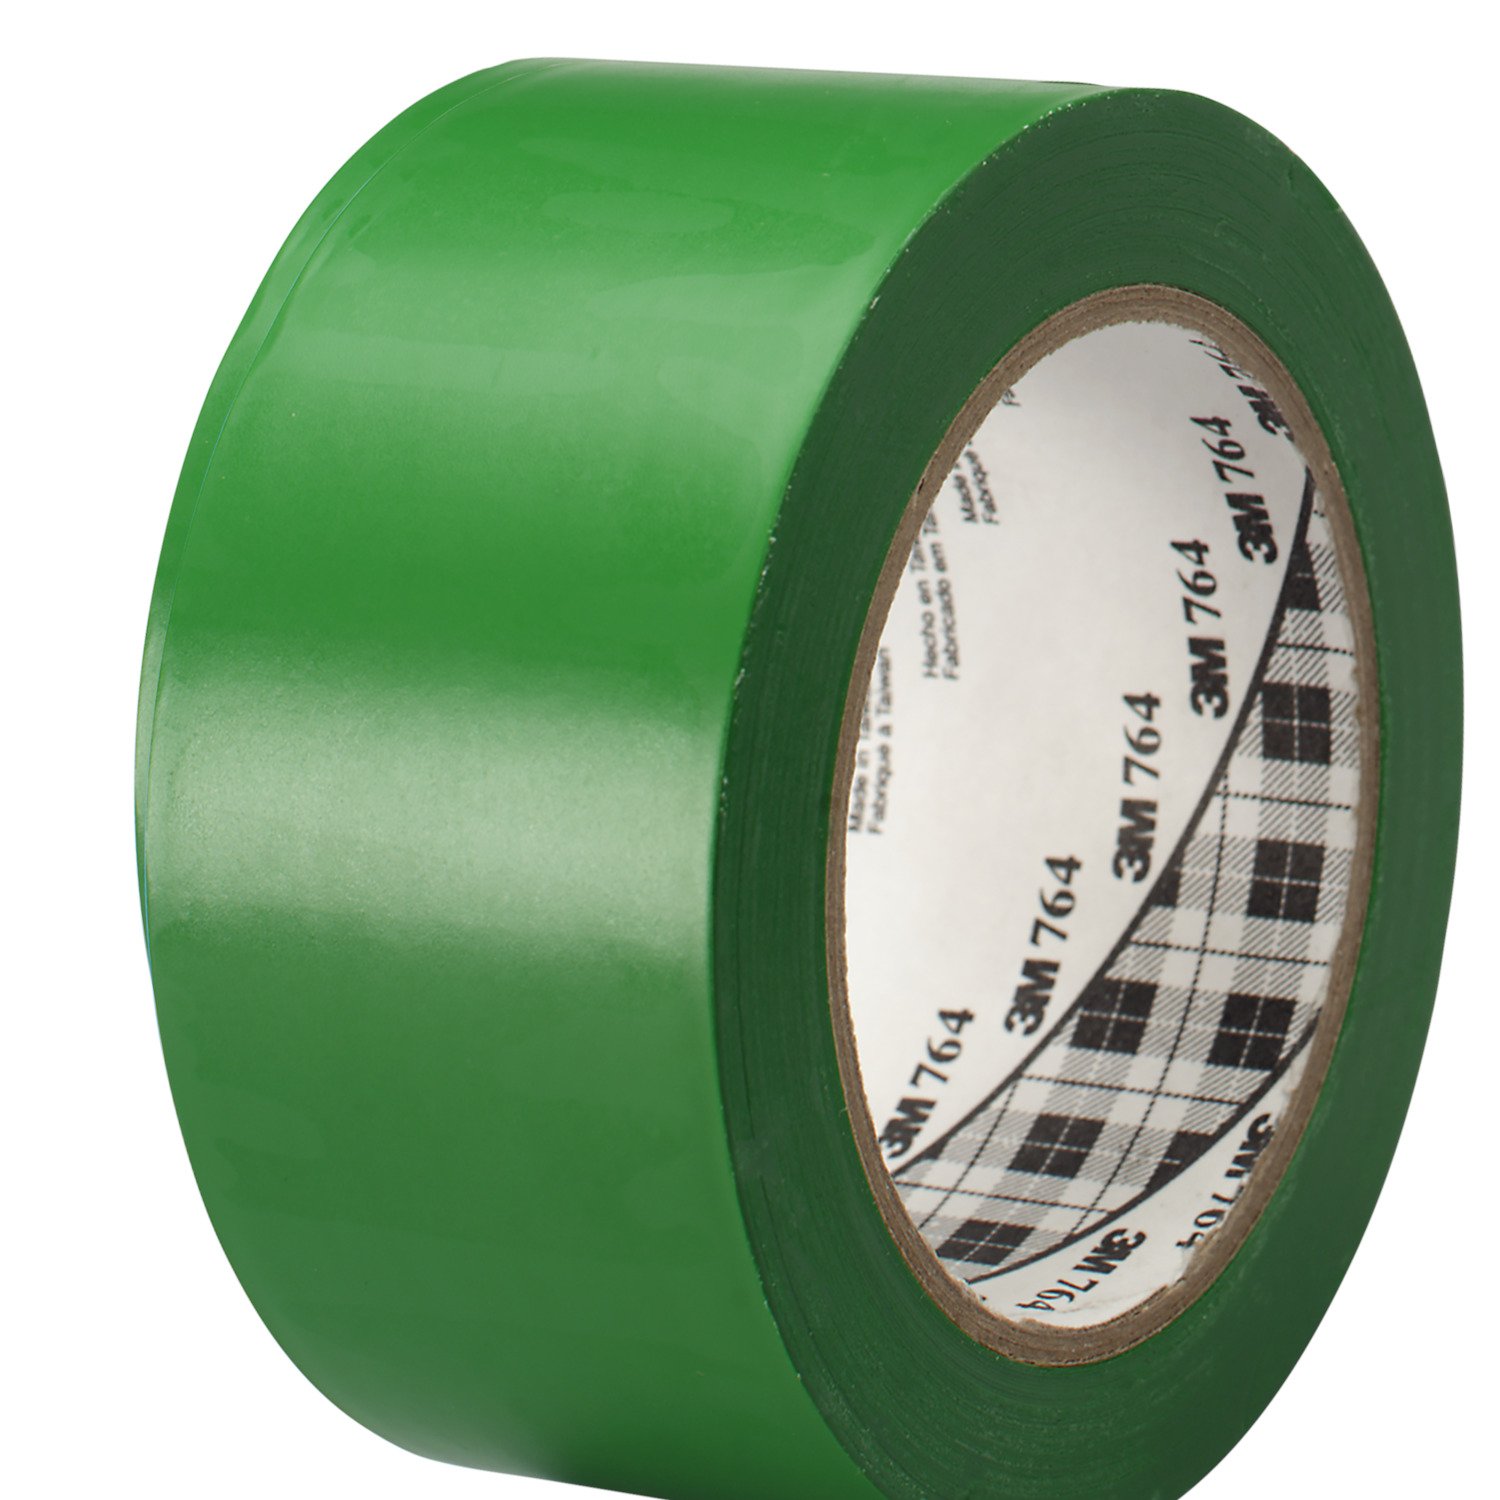 3M Vinyl Tape\ 764\ 2 in by 108 ft\ Green\ Social Distancing\ Floor & Safety Marking\ 1 Pack